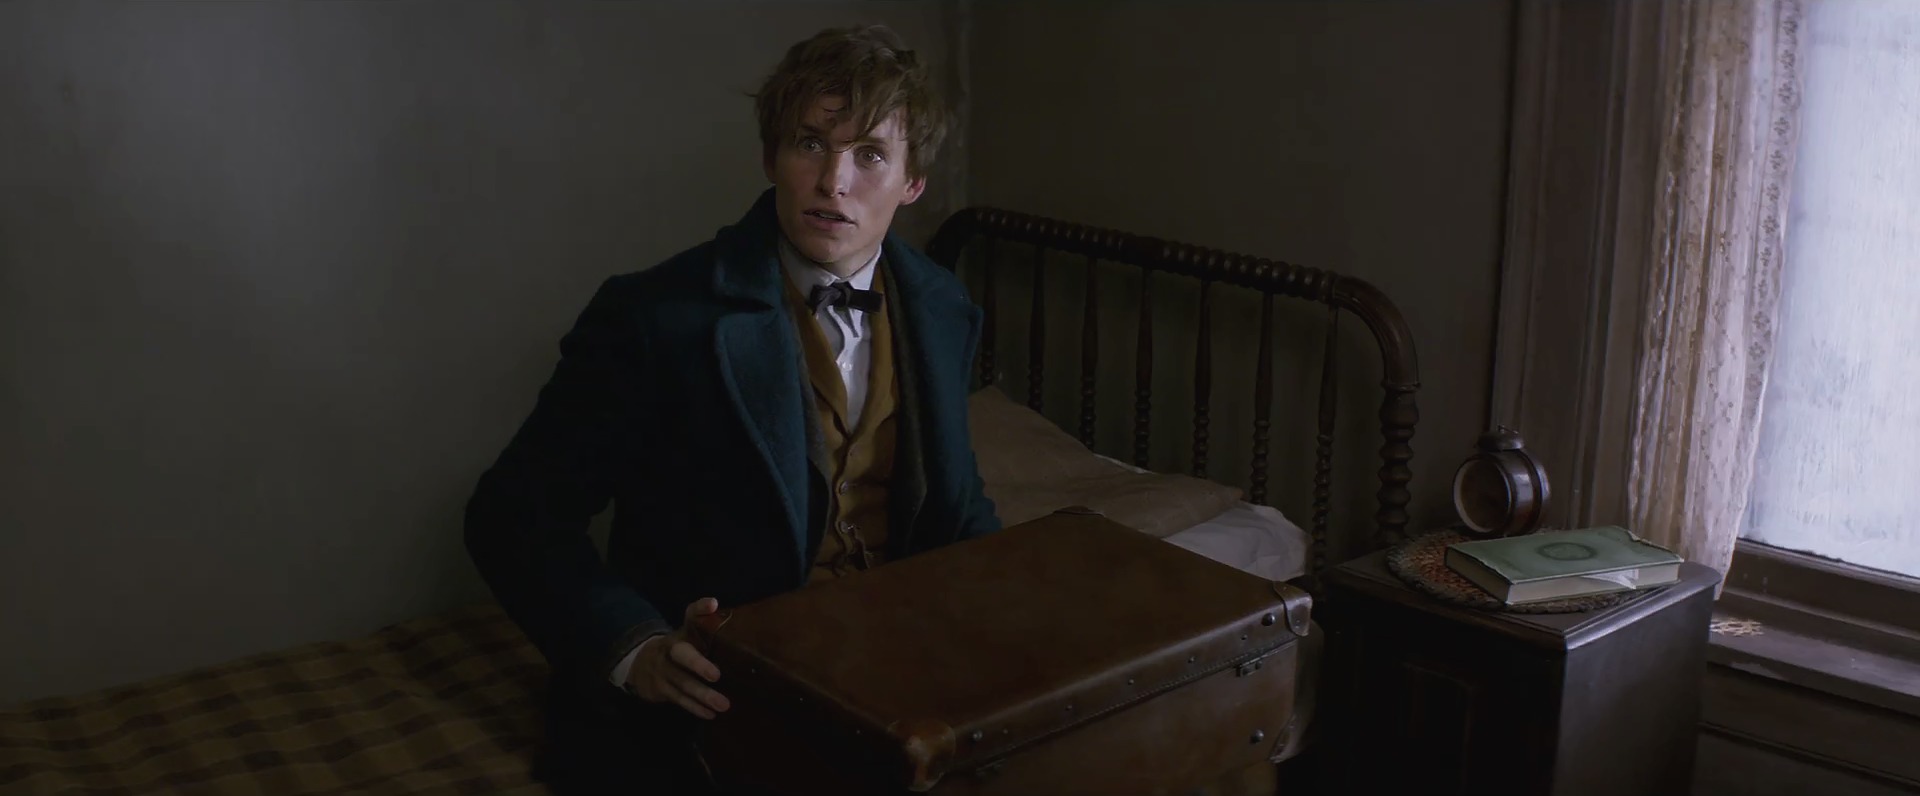 Online Film Watch Fantastic Beasts And Where To Find Them 2016